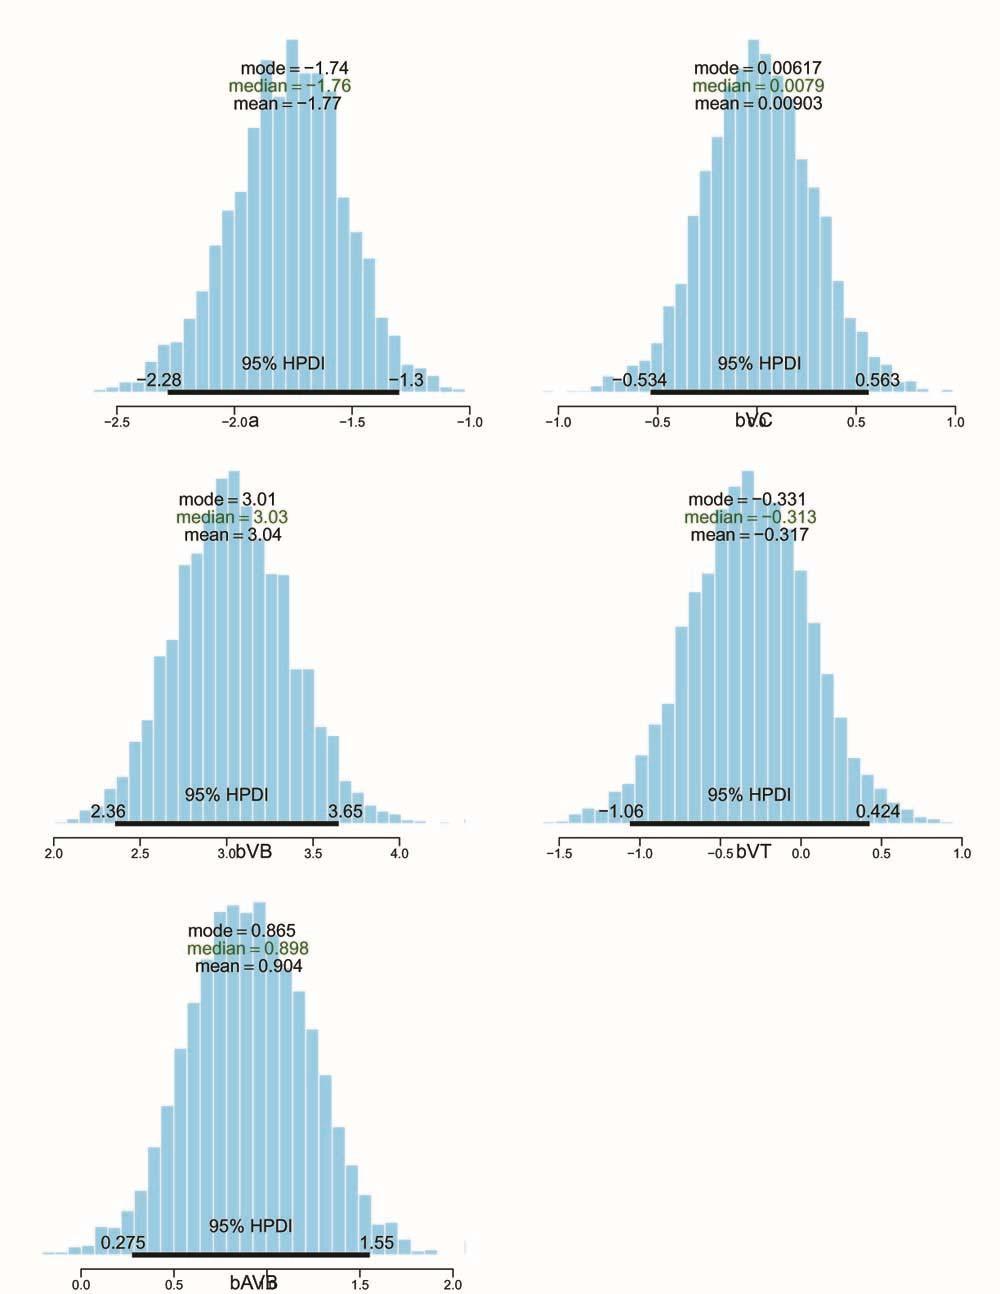 Figure 4: Posterior distributions of all coefficients from the model (mb3), the model of simple additivity for